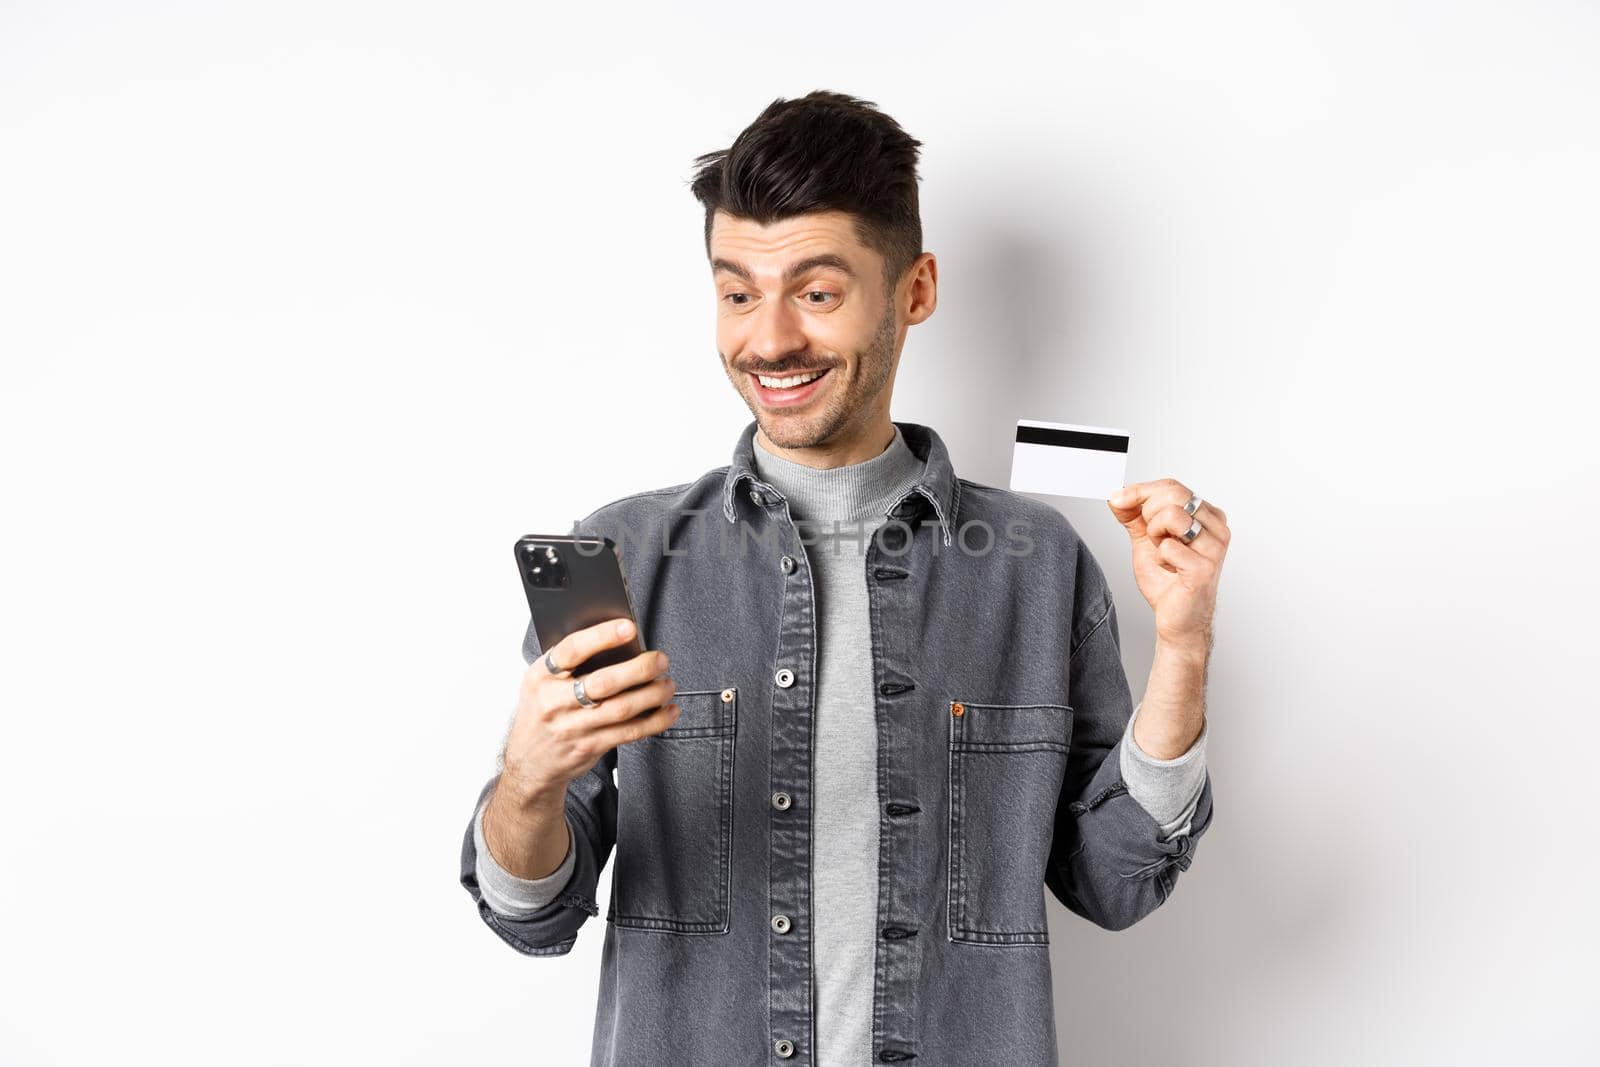 Online shopping concept. Smiling guy paying on mobile phone, showing plastic credit card, buying in internet, white background.